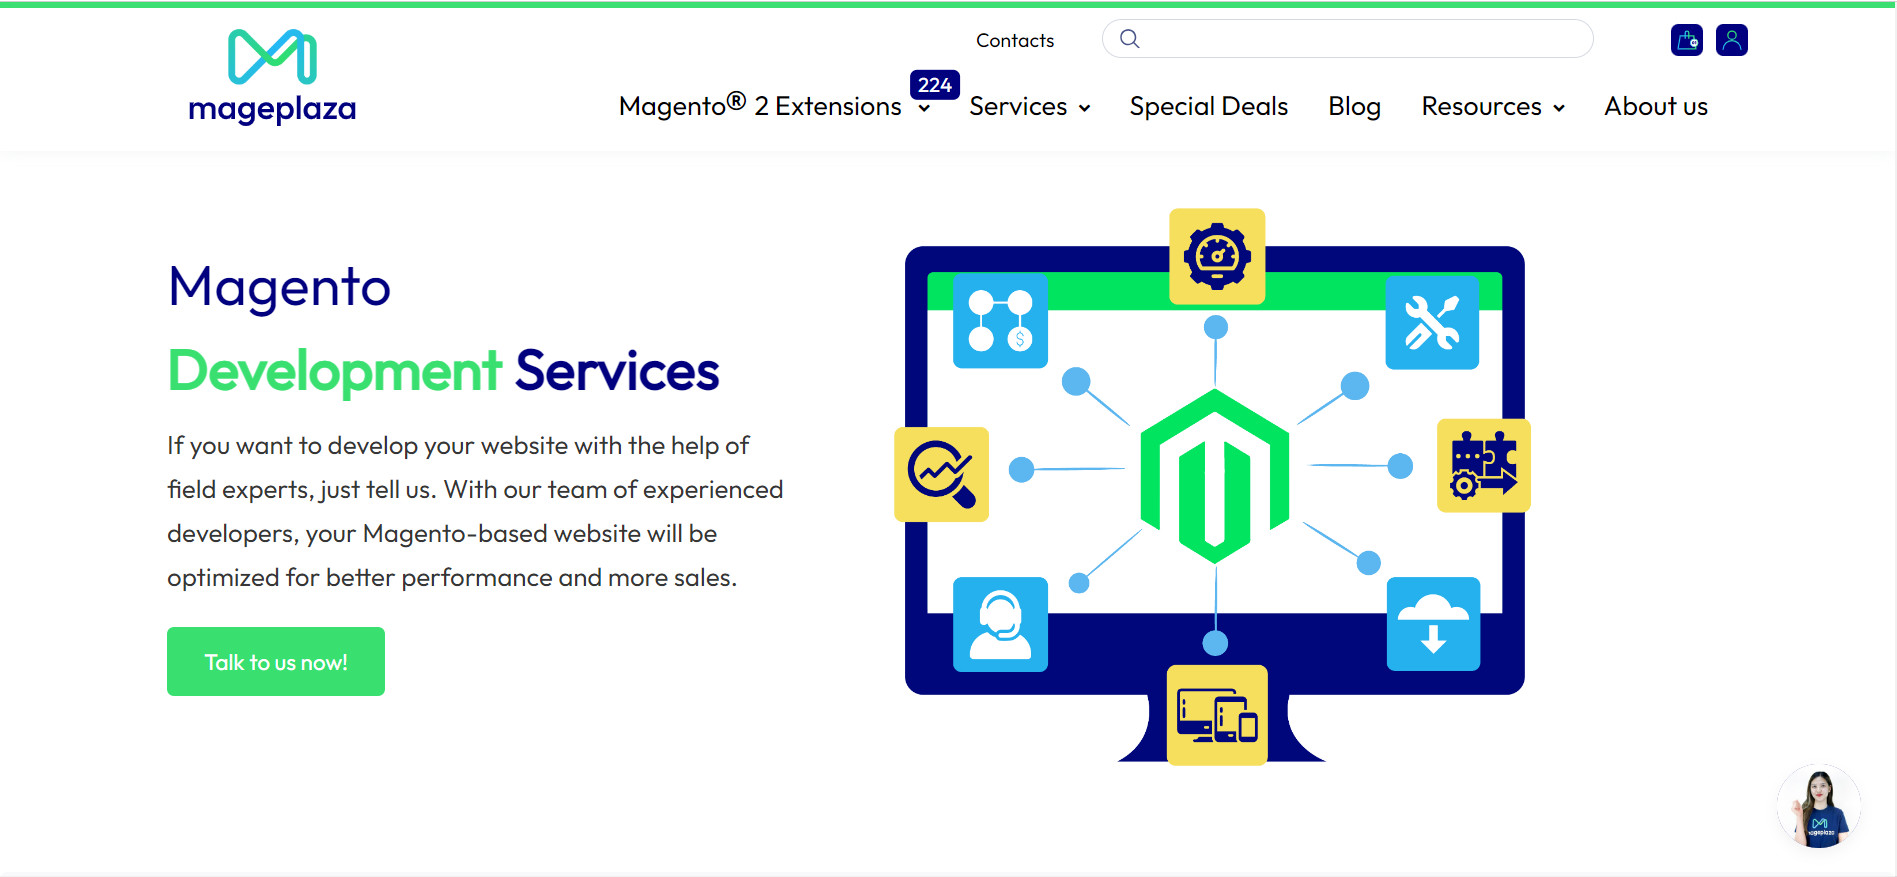 hire magento theme developer with Mageplaza service